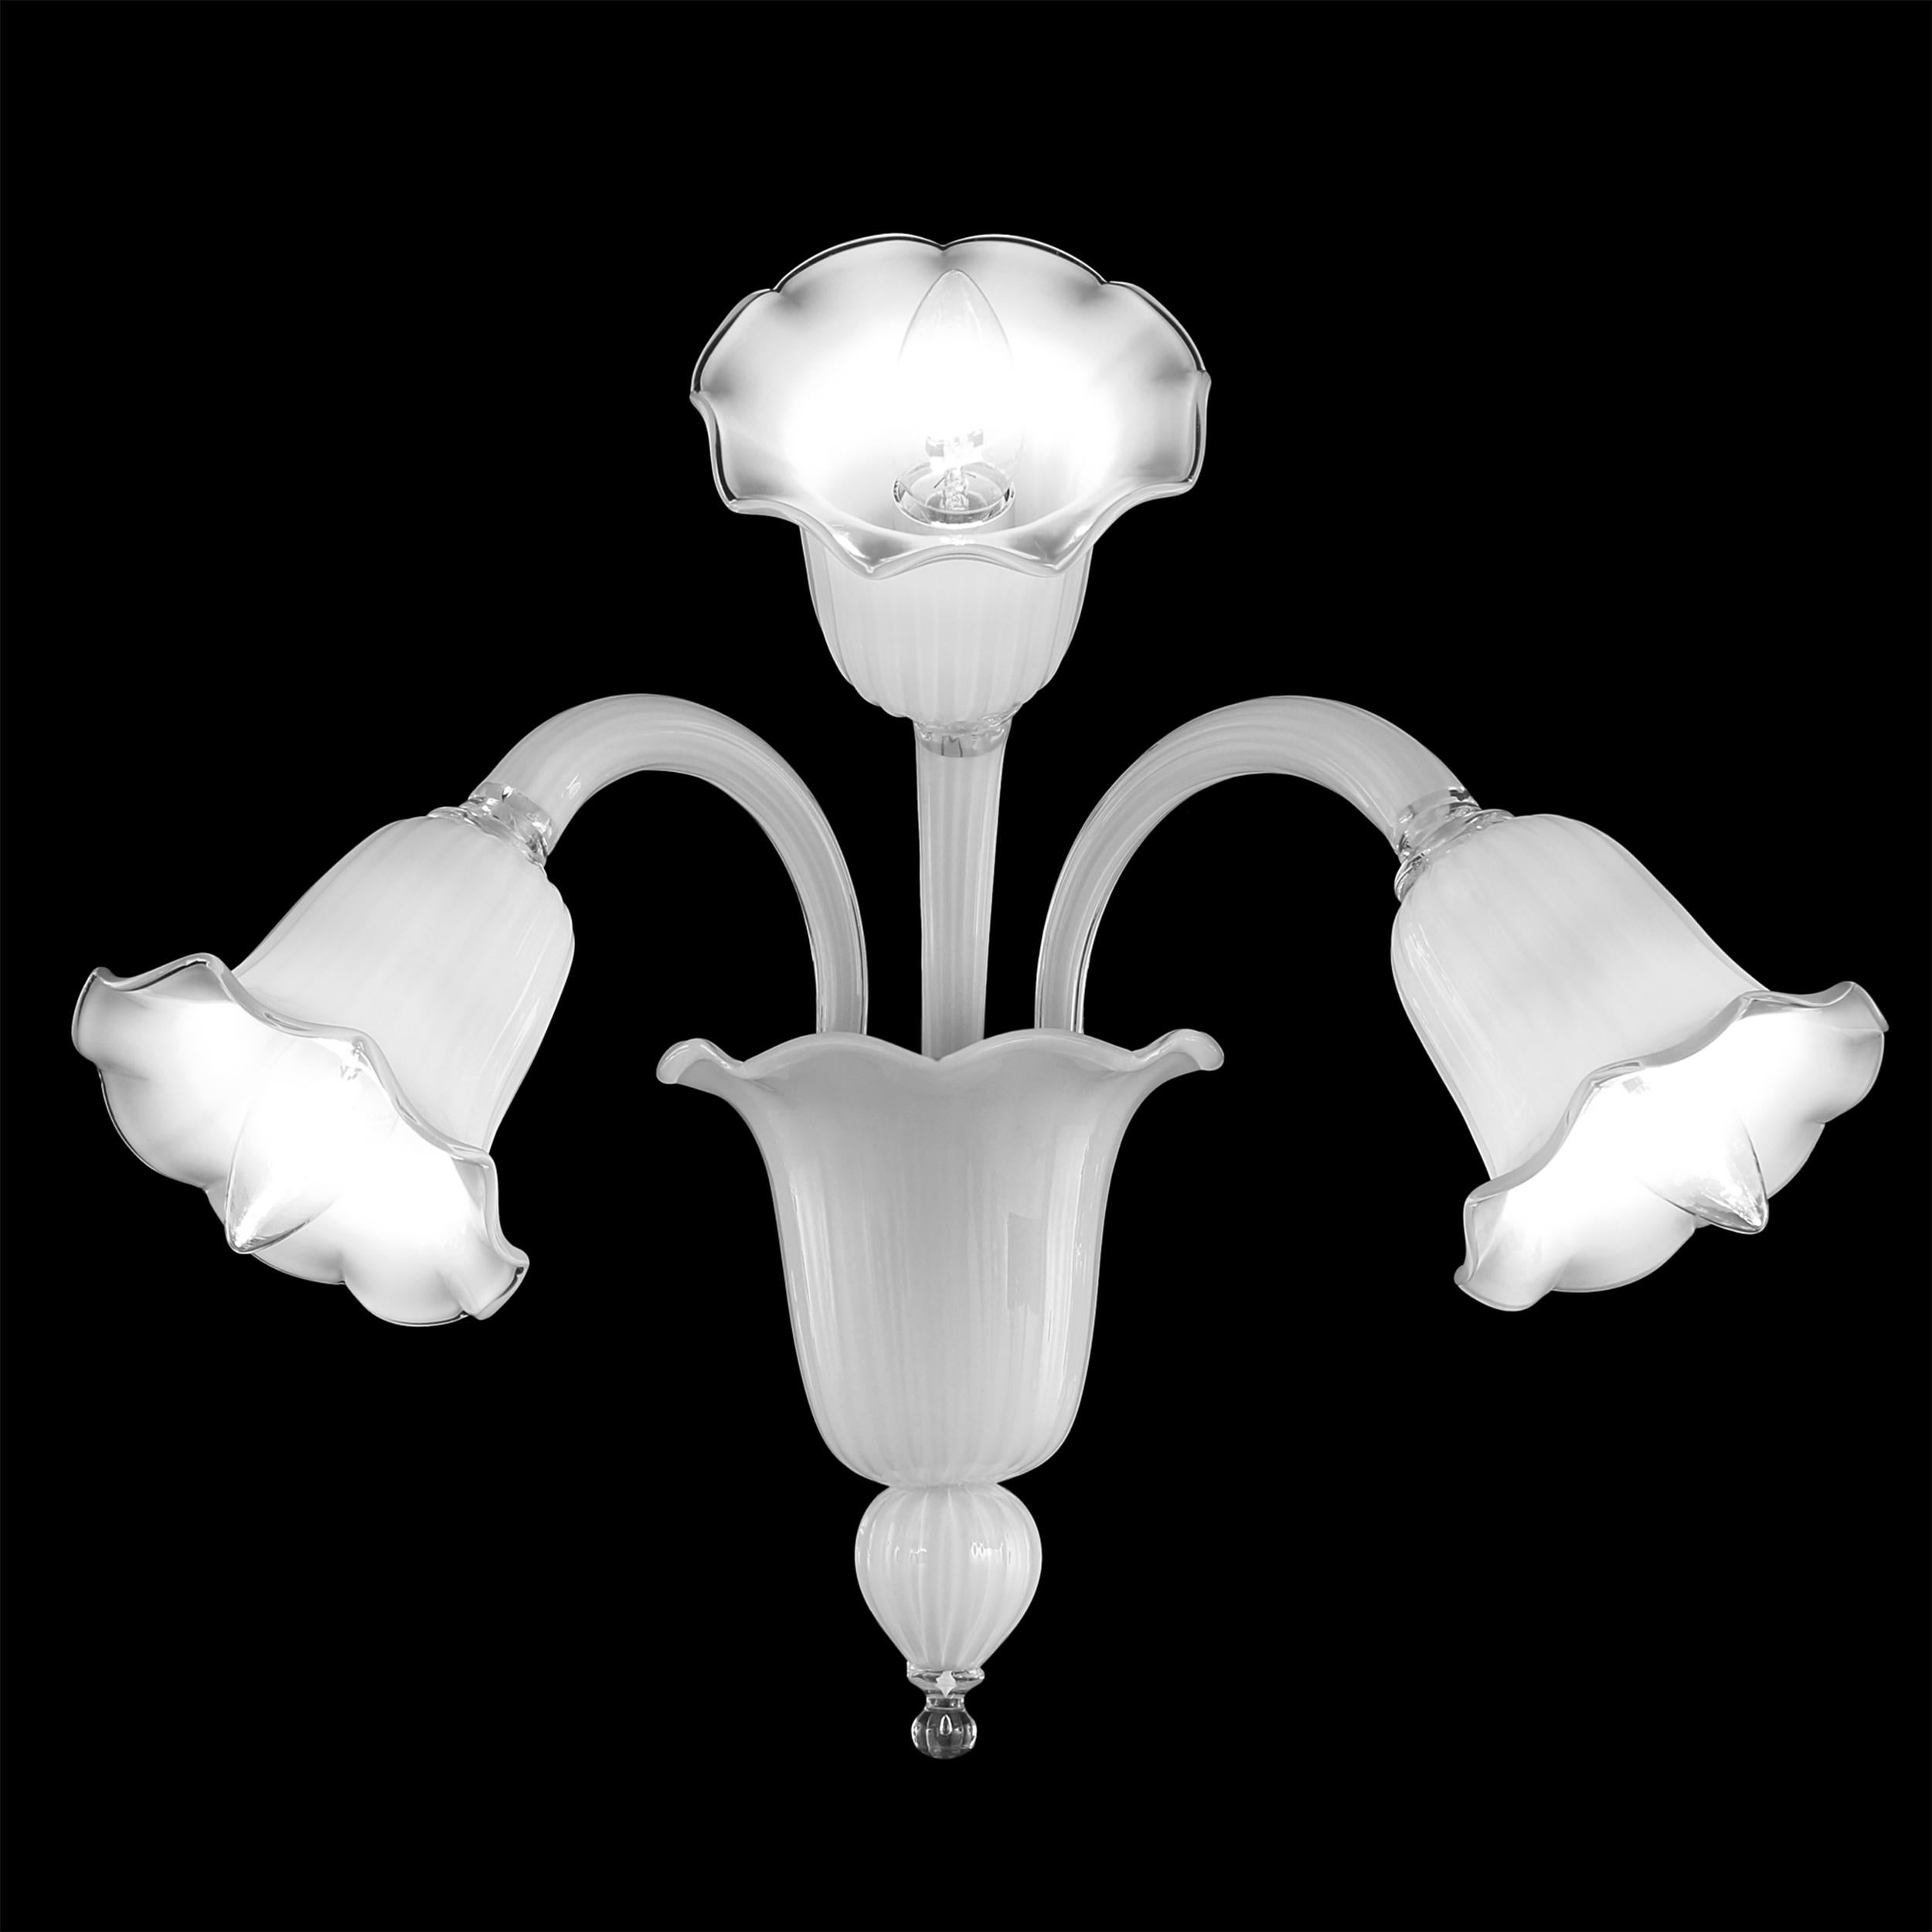 Multiforme Bellepoque 394 sconce 2+1 lights, white encased Murano glass
As other Multiforme collections, also Bellepoque is available in two variations: the Murano glass Bellepoque 394 is the version with downward lights.
This variation of the